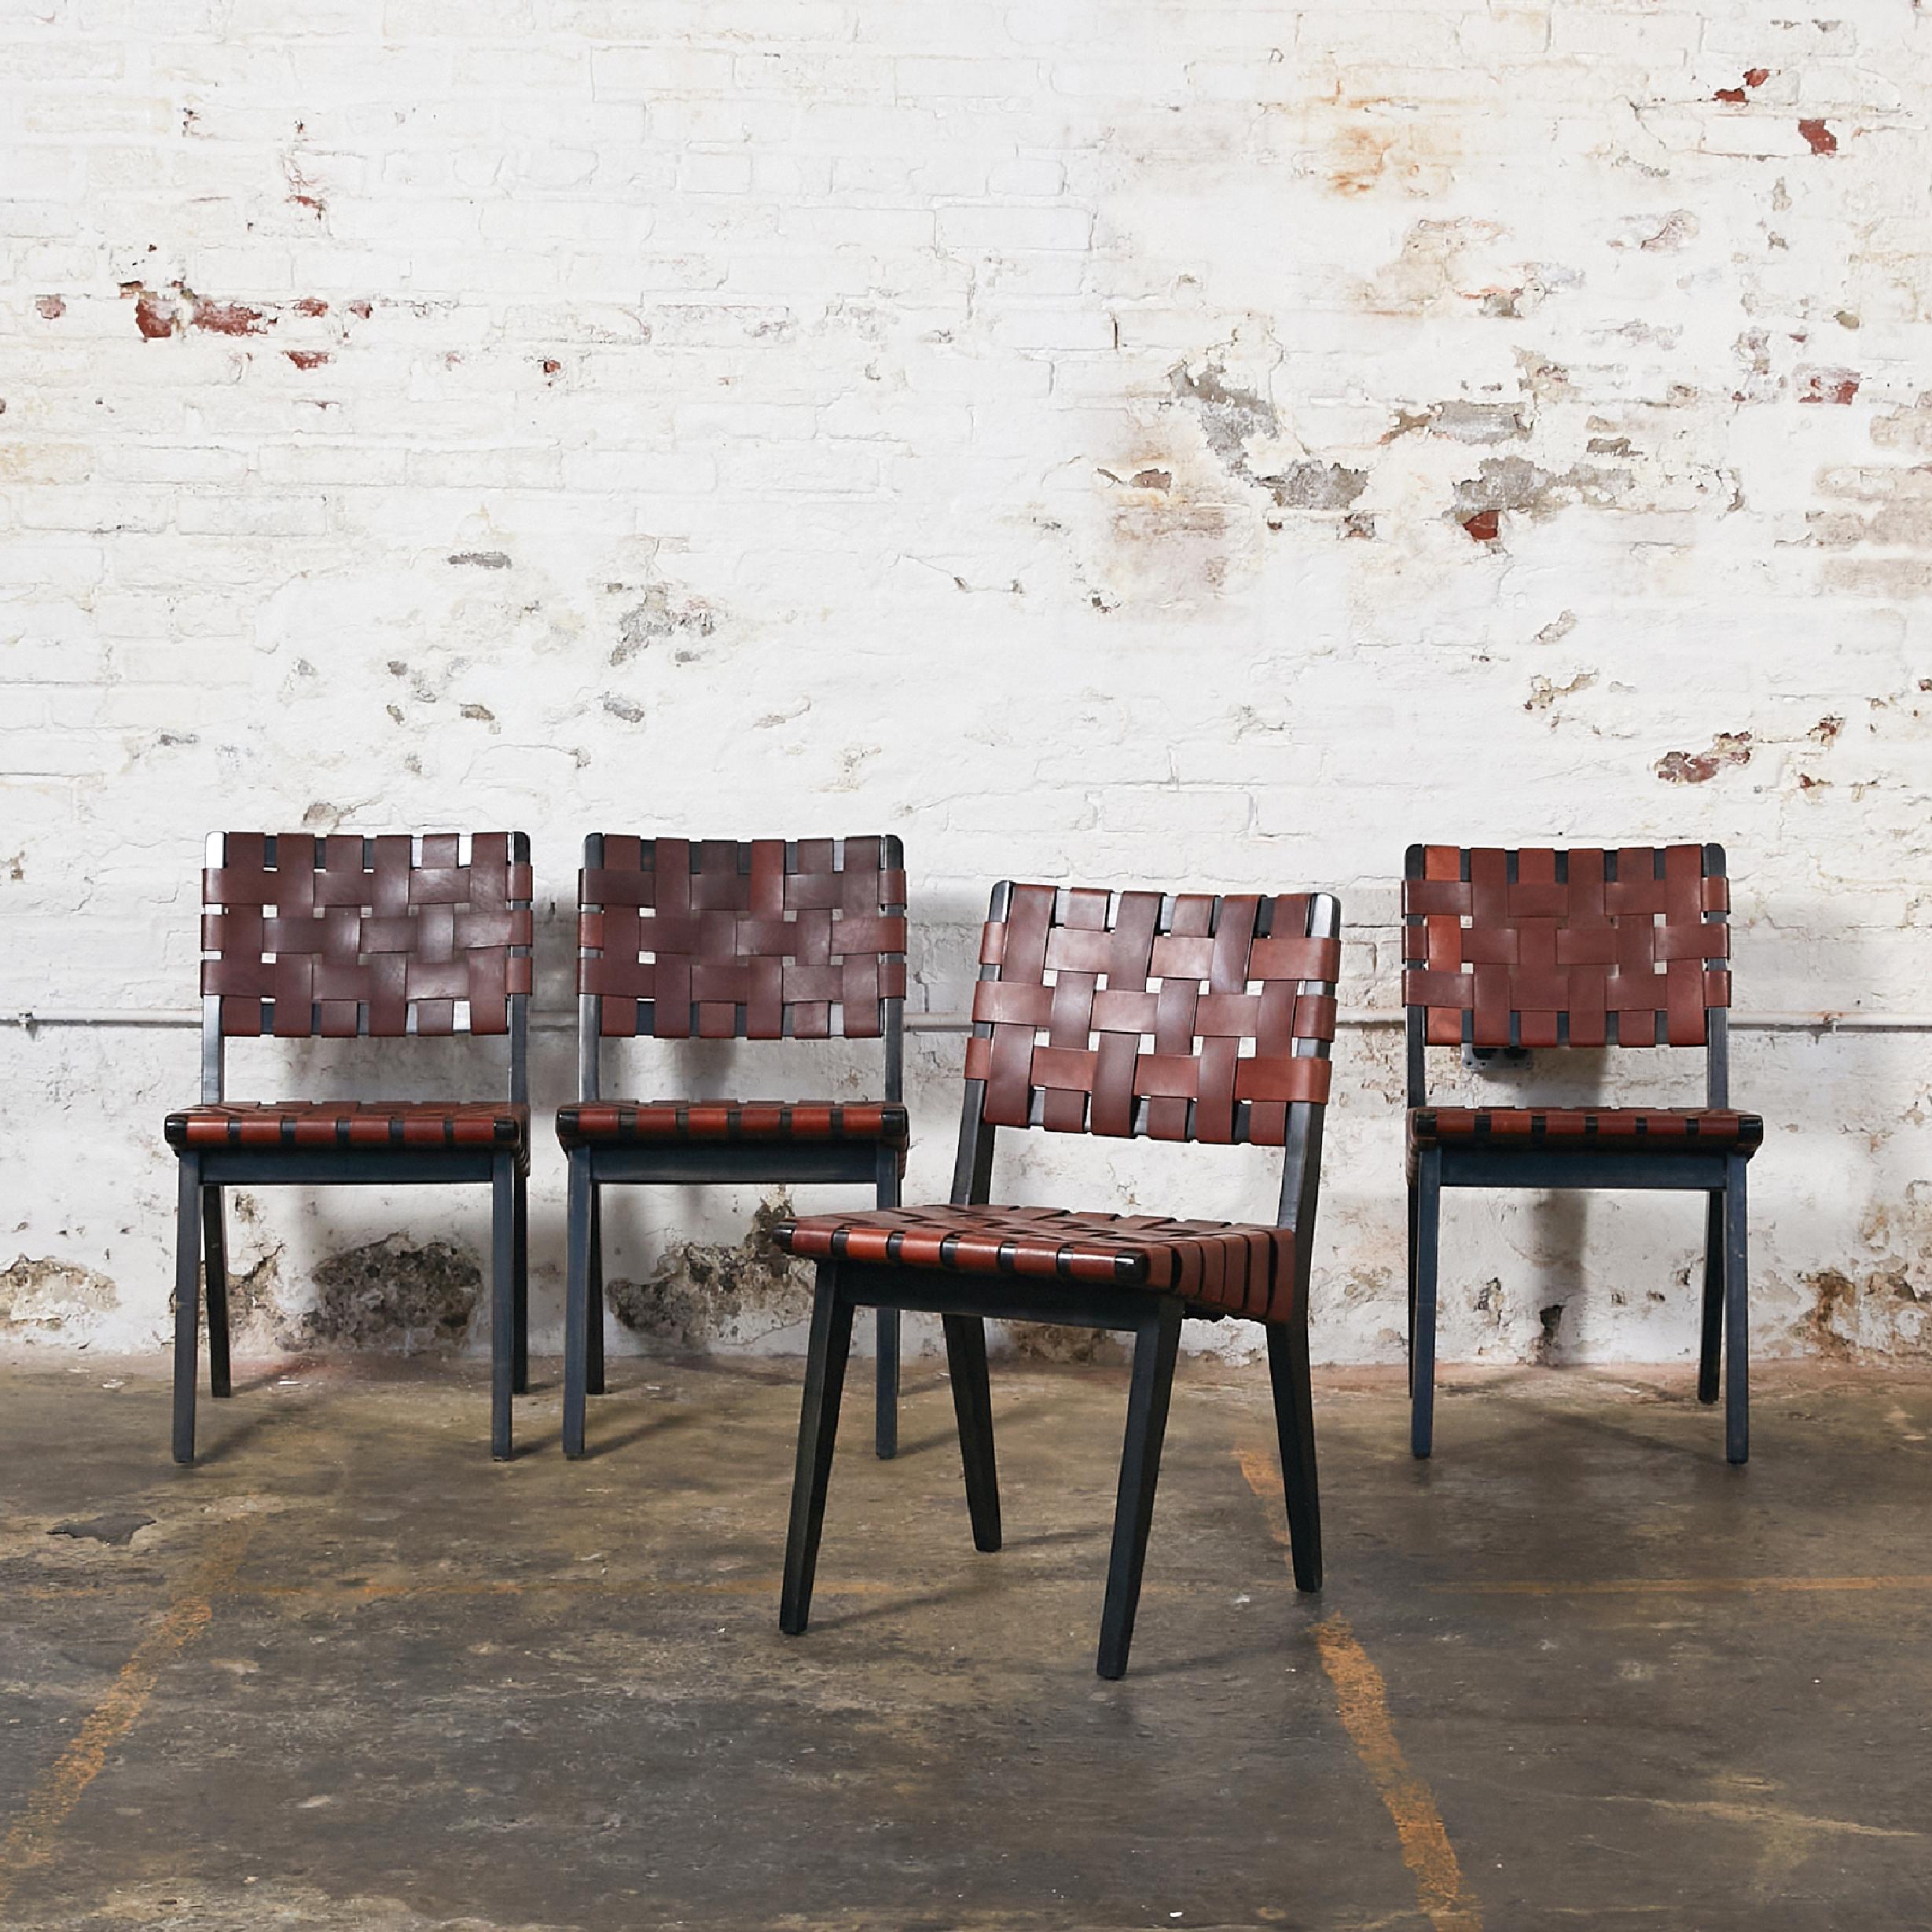 Set of four chairs in the style of Jens Risom.
Frame in wood stained in black. Seat and back in woven saddle brown leather straps, with studs in antique bronze finish.